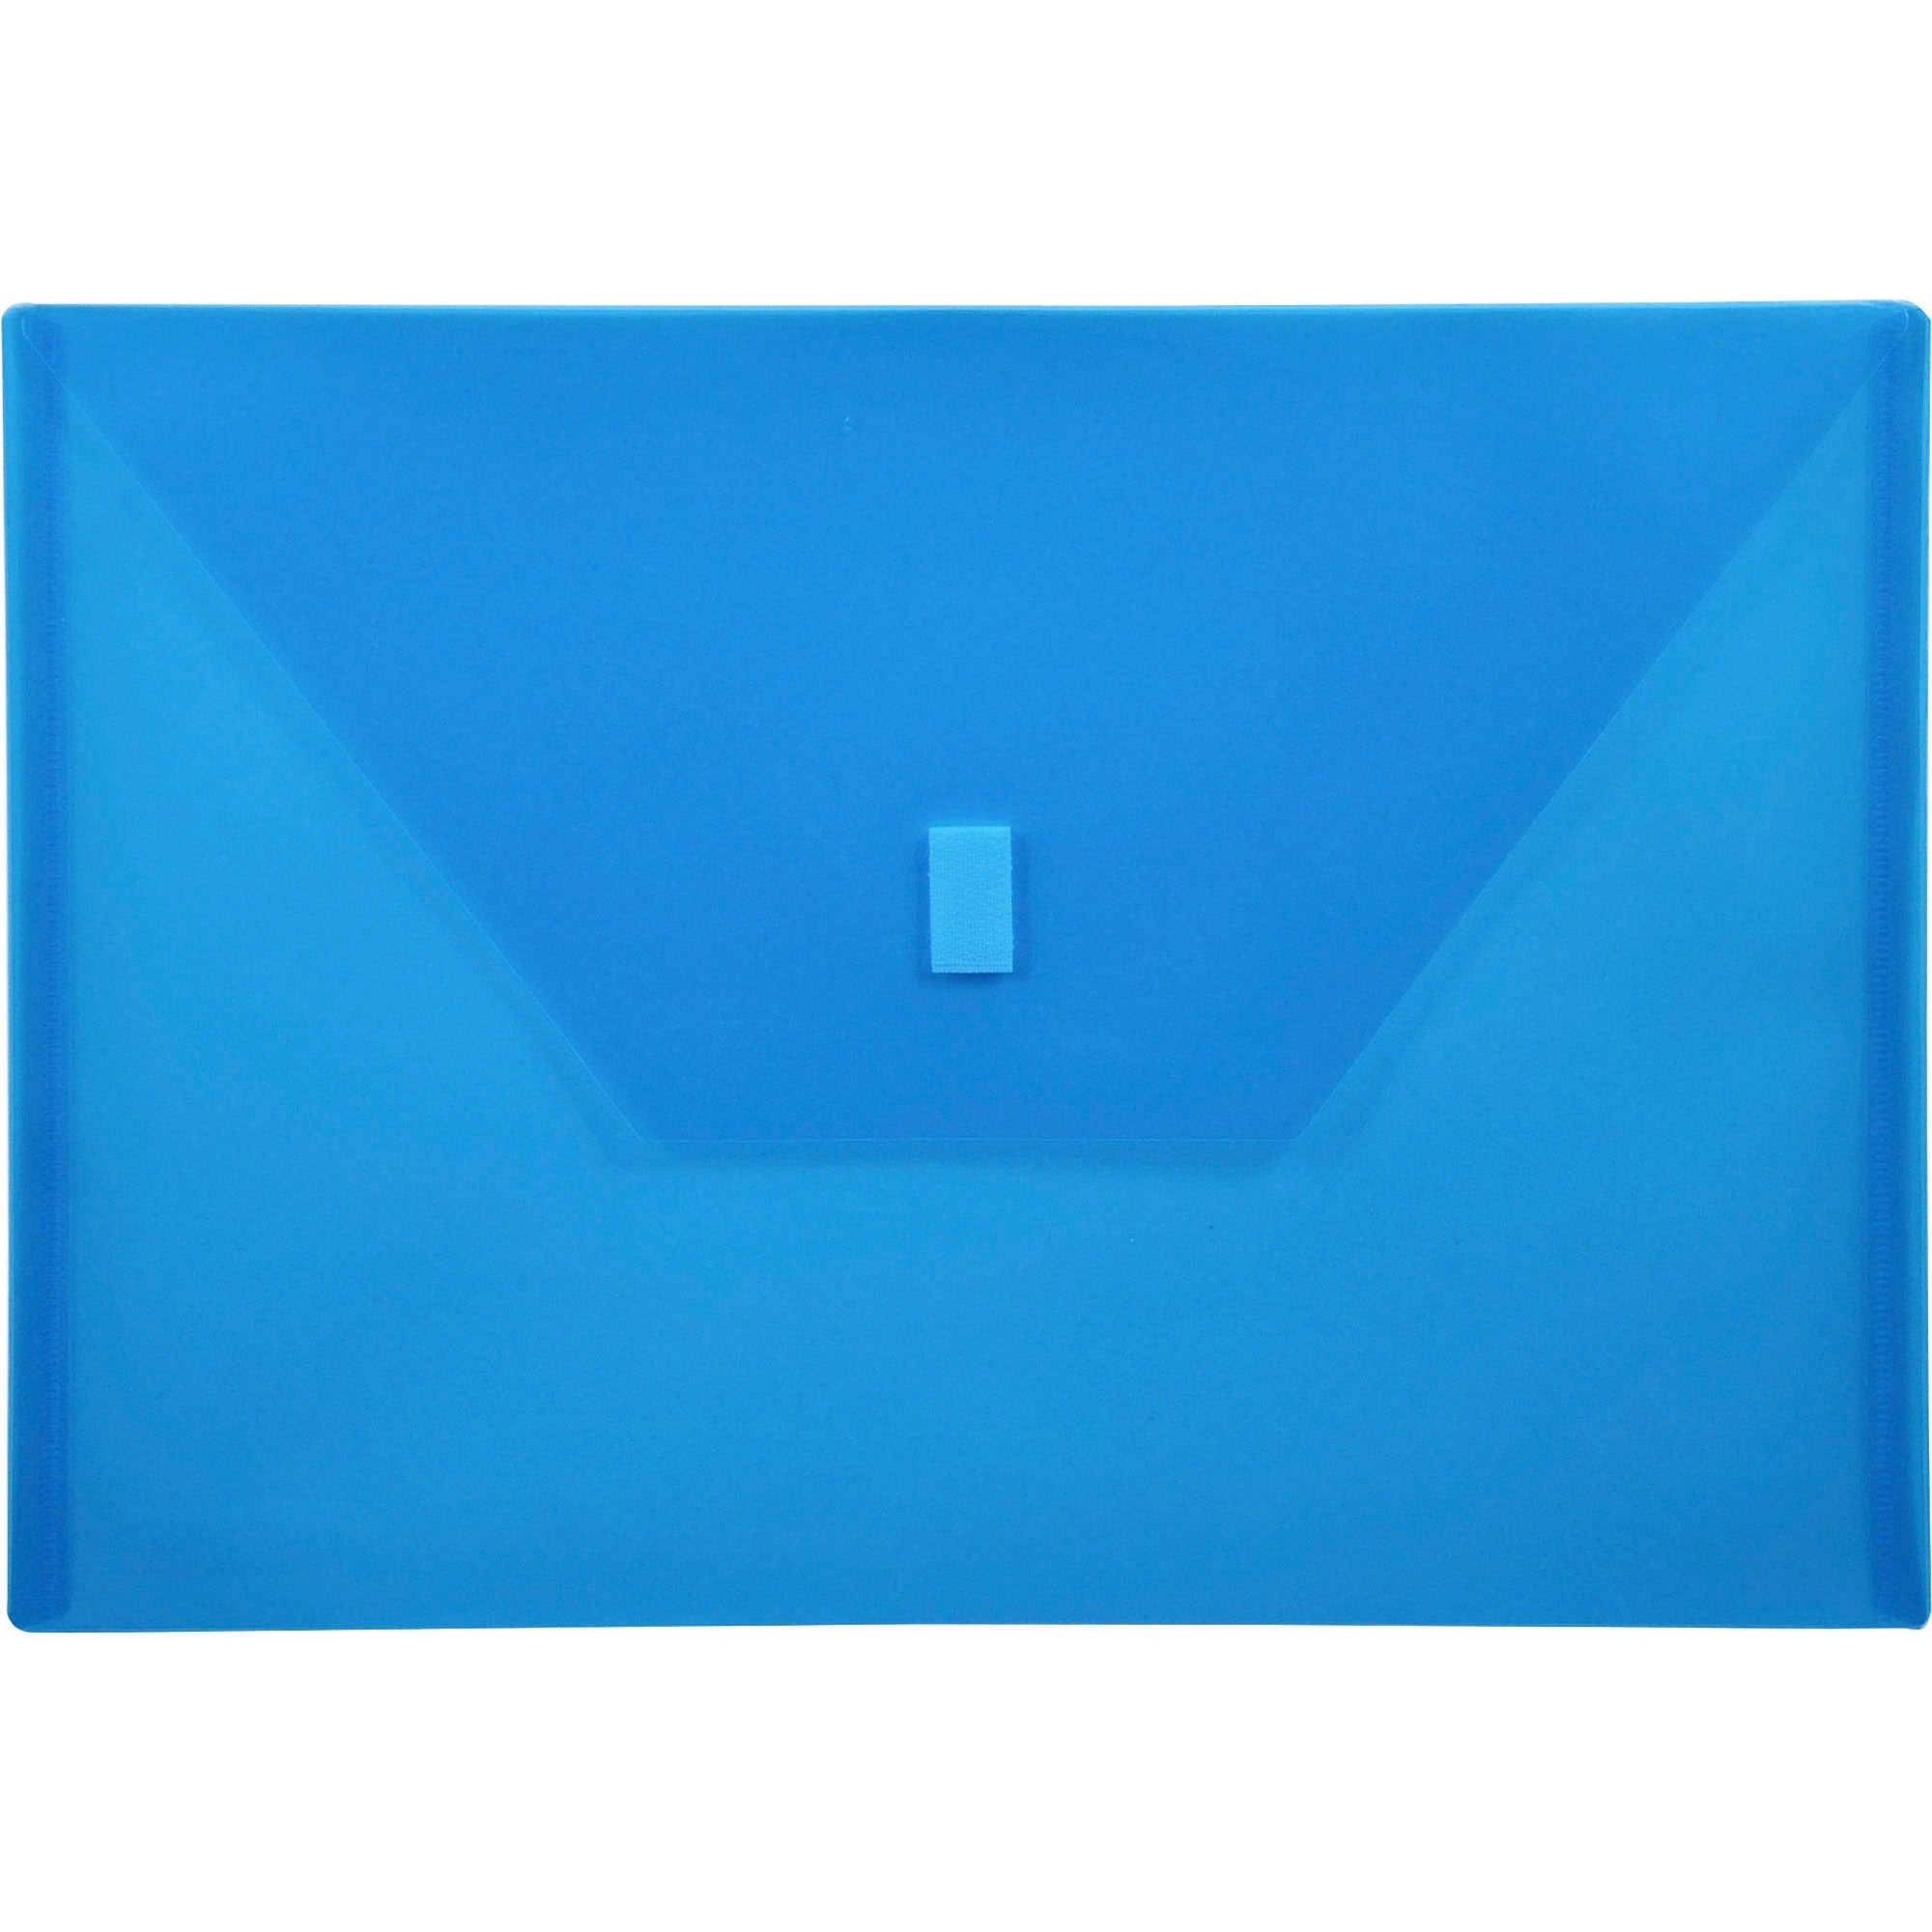 Lion A4 Recycled File Pocket - 8 17/64" x 11 11/16" - Polypropylene - Blue - 20% Recycled - 1 Each - 